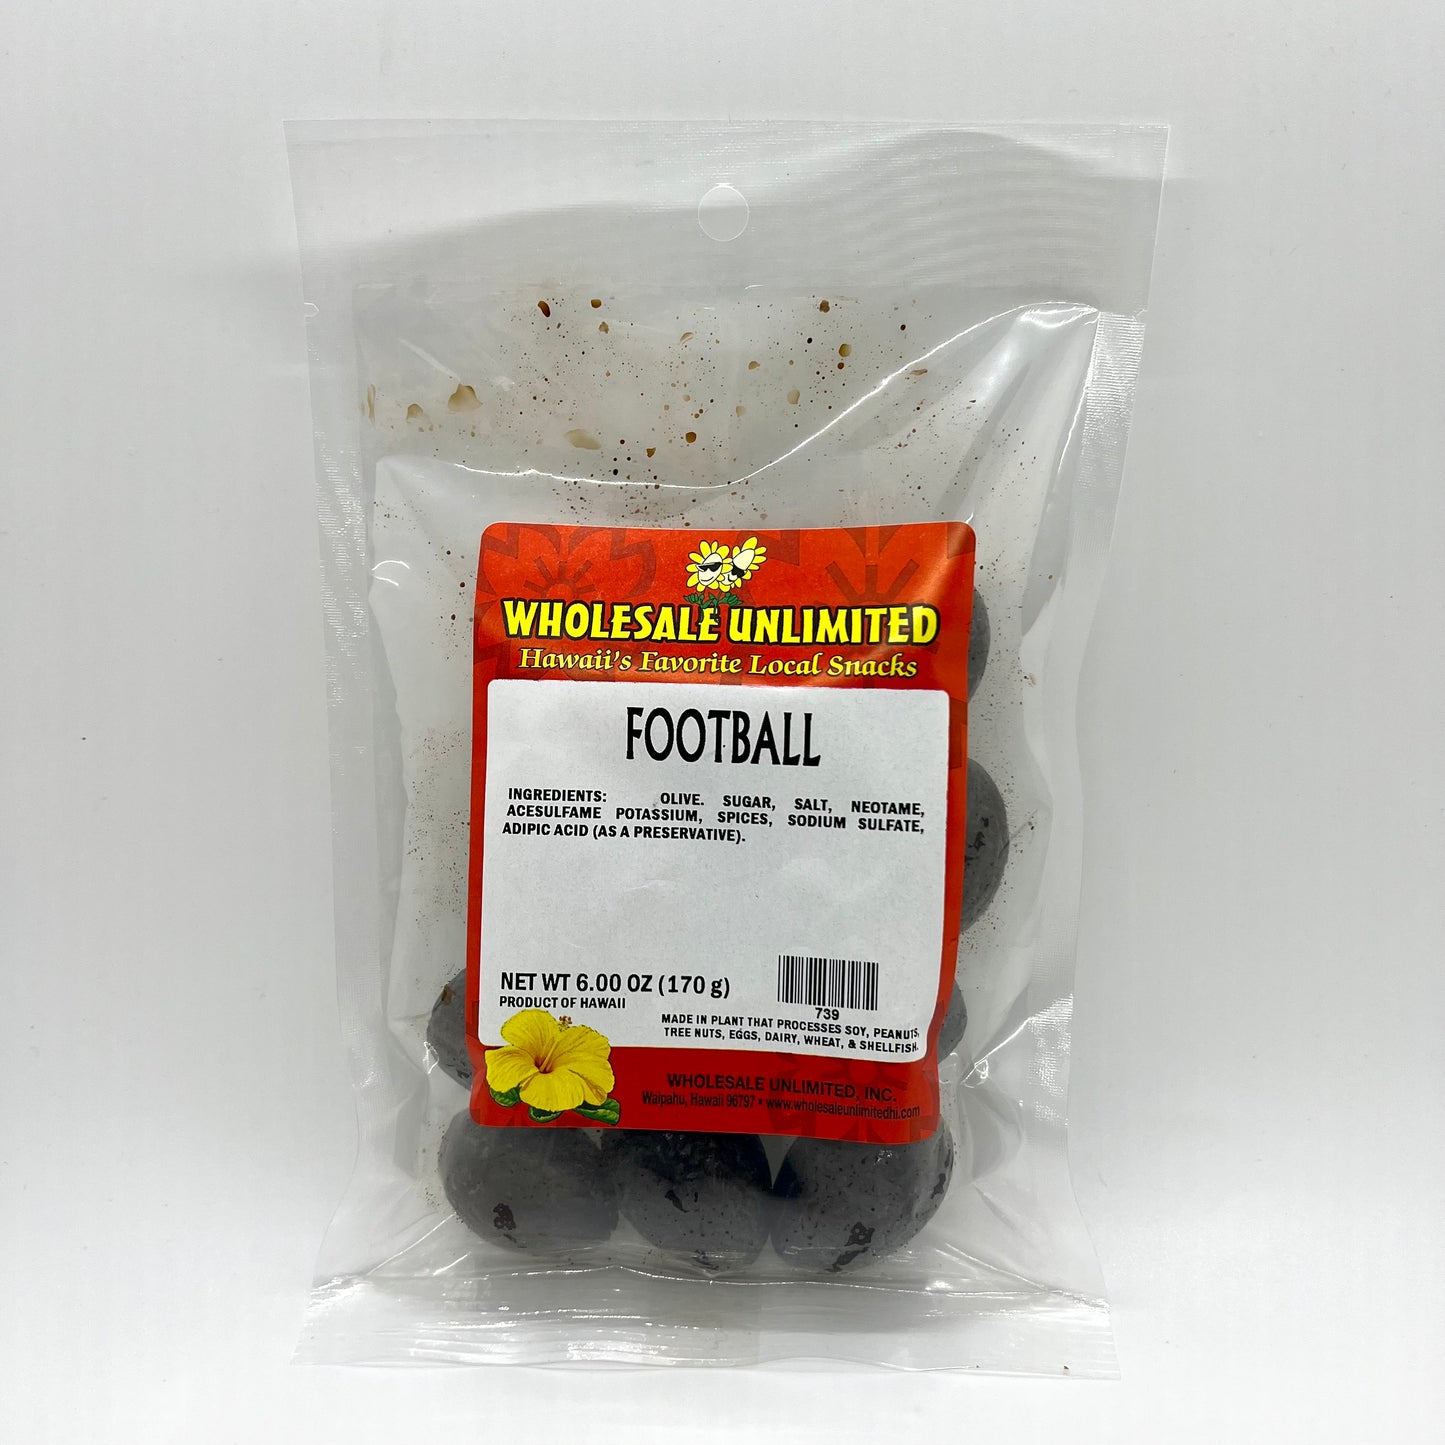 (NEW) Football - Wholesale Unlimited Inc.